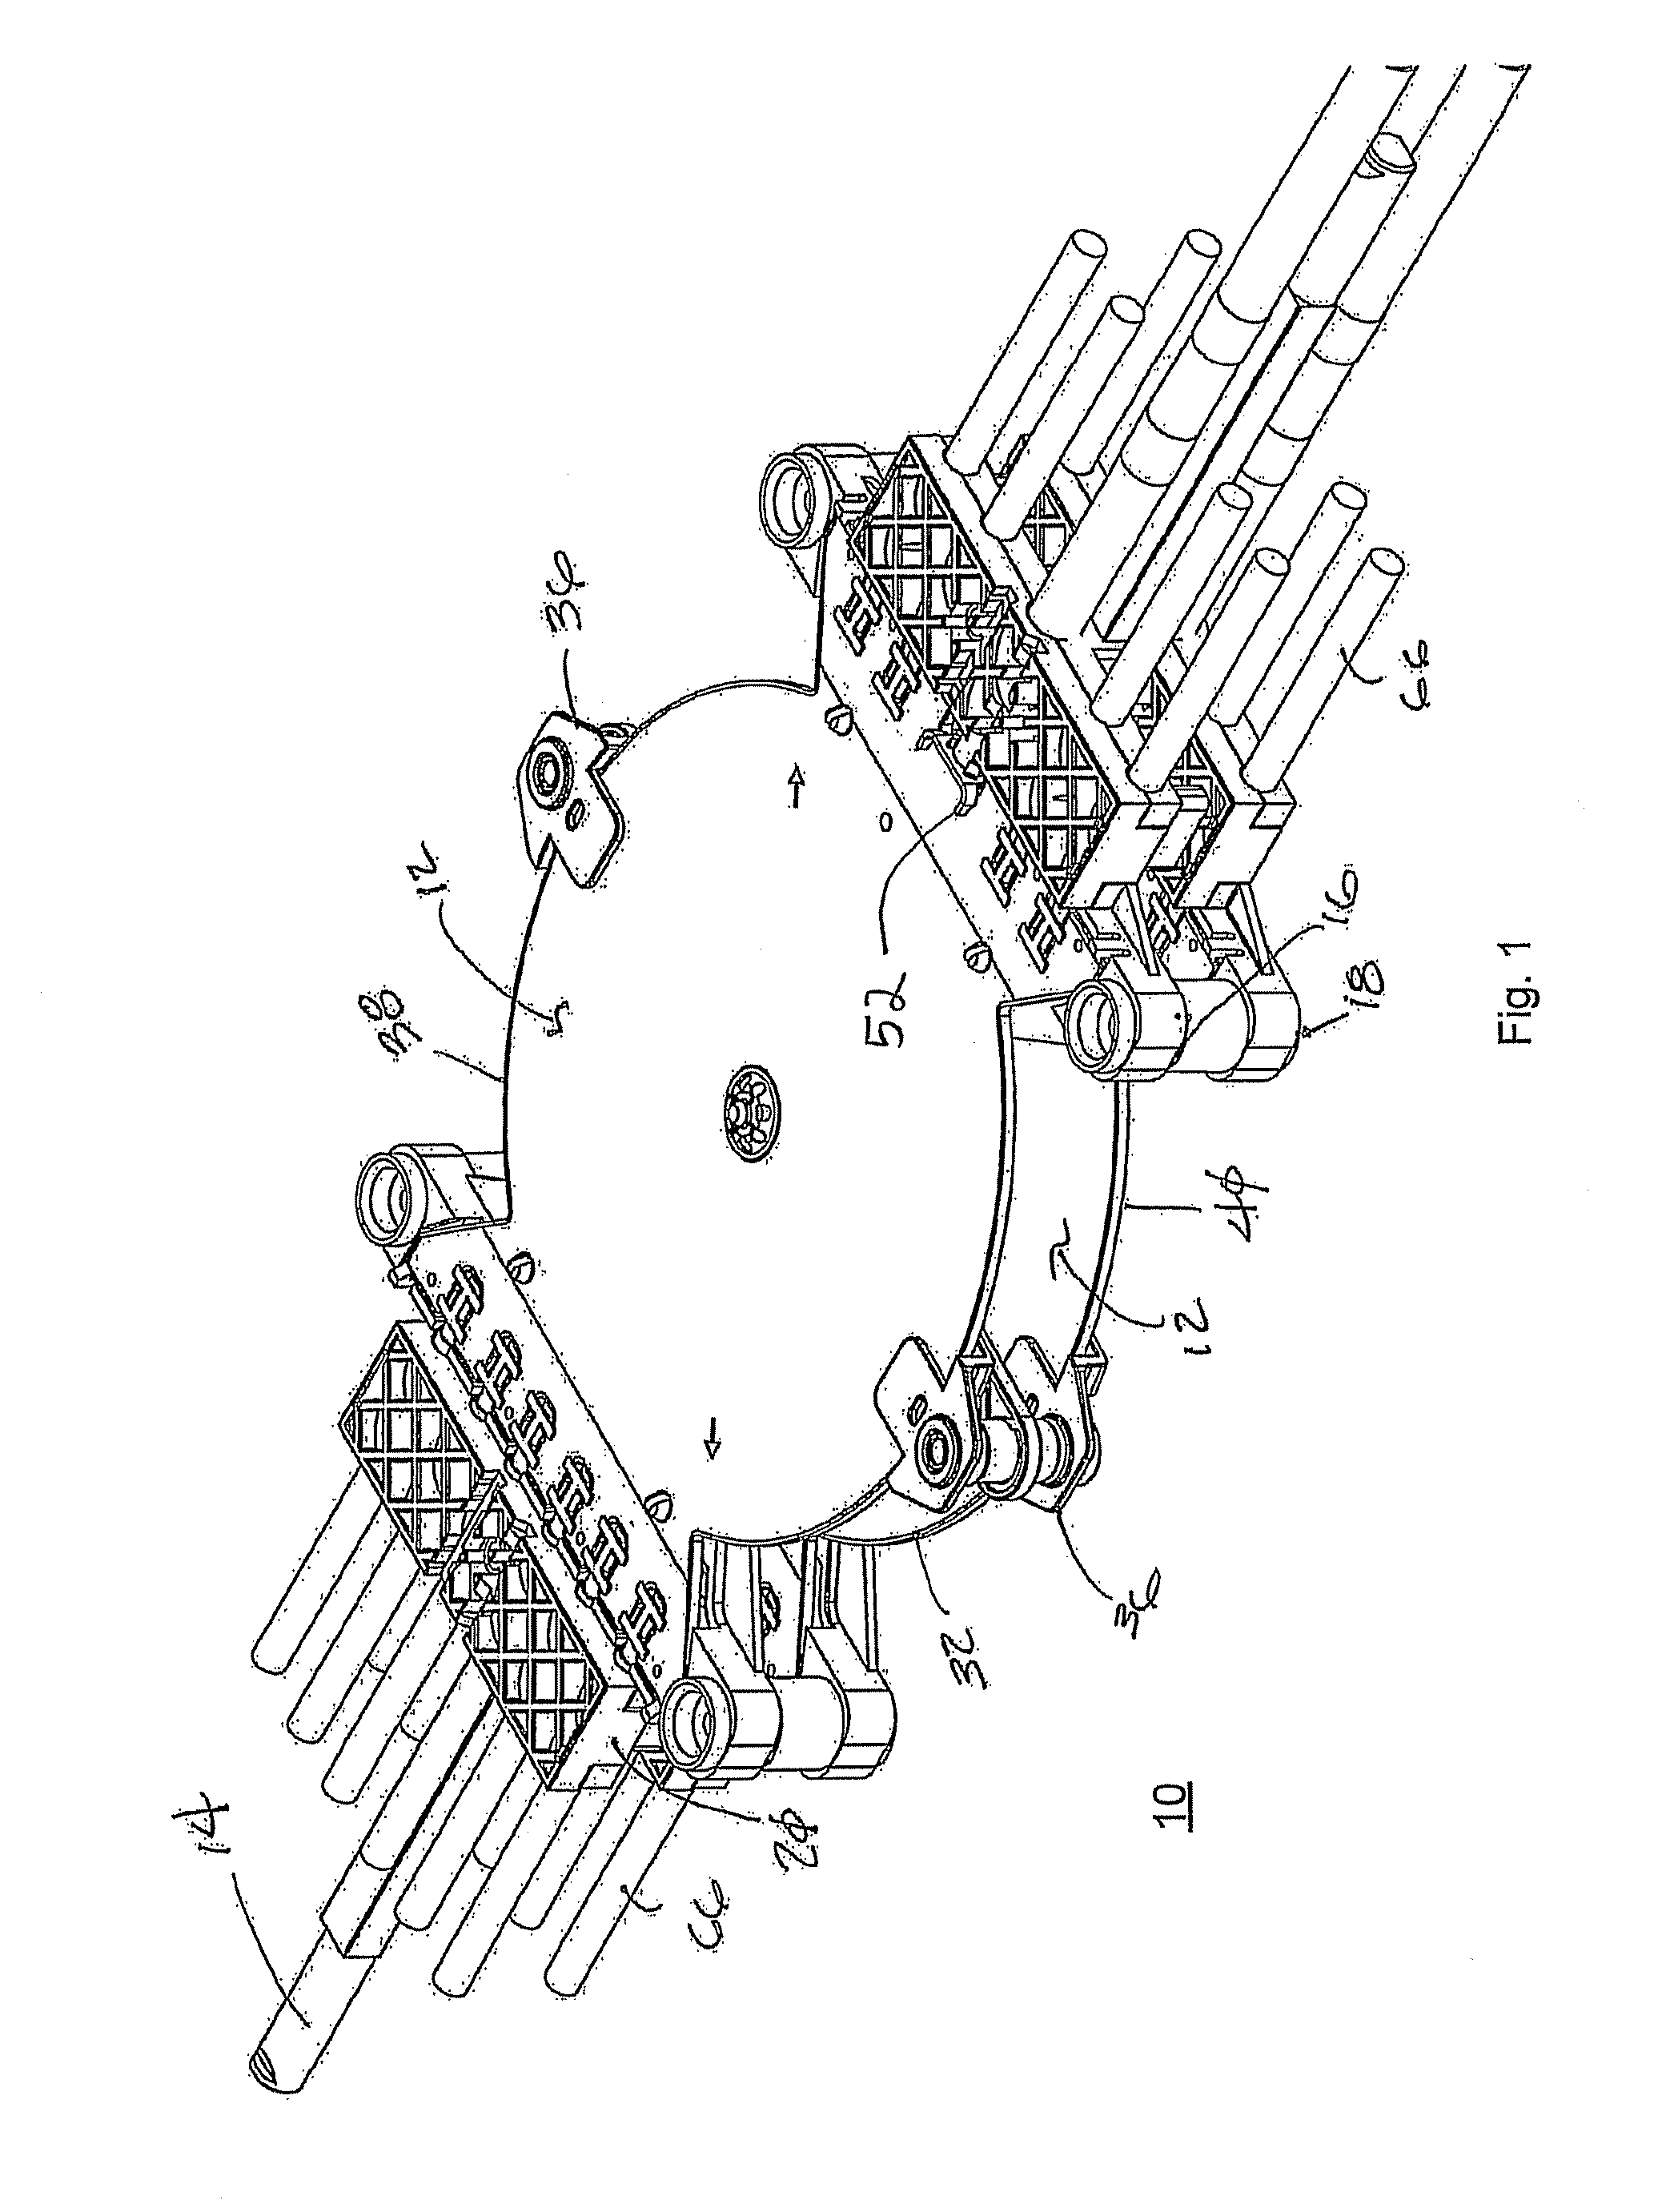 Plural phase shifter assembly having wiper PCBs movable by a pivot arm/throw arm assembly